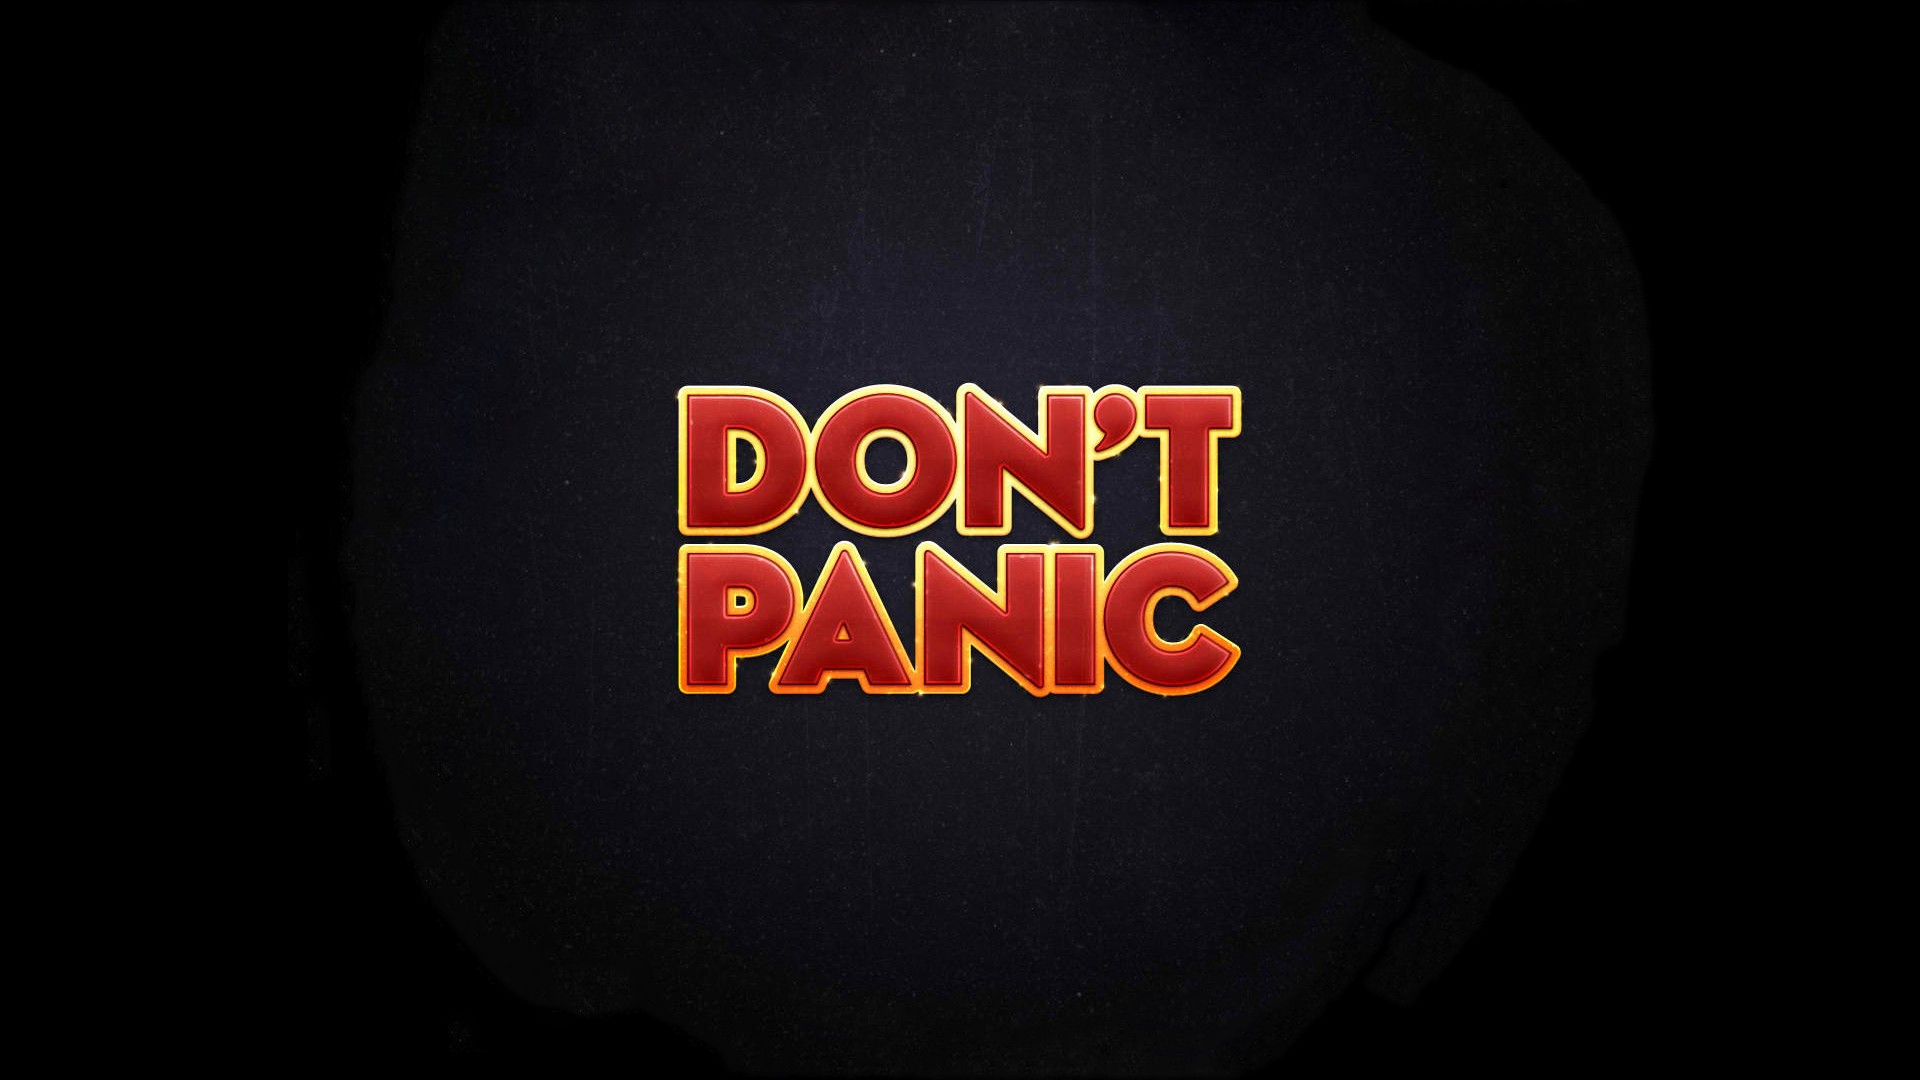 Movie The Hitchhiker's Guide to the Galaxy HD Wallpaper | Background Image